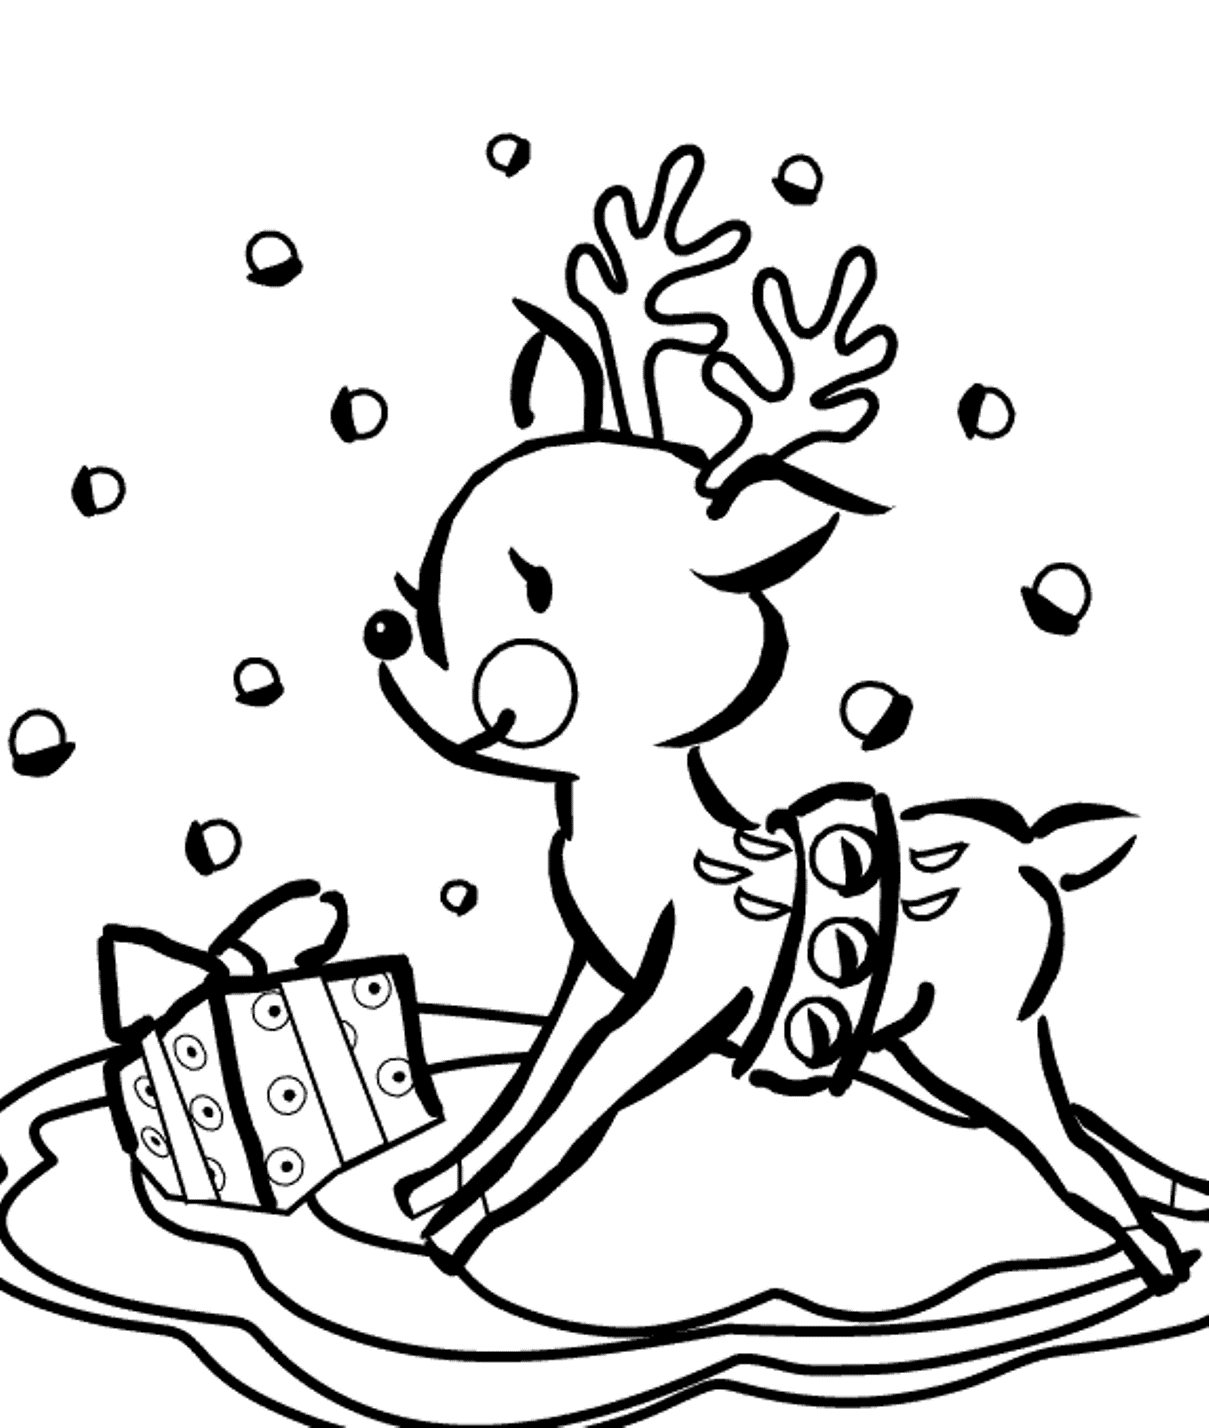 Presents And Reindeer Coloring Page